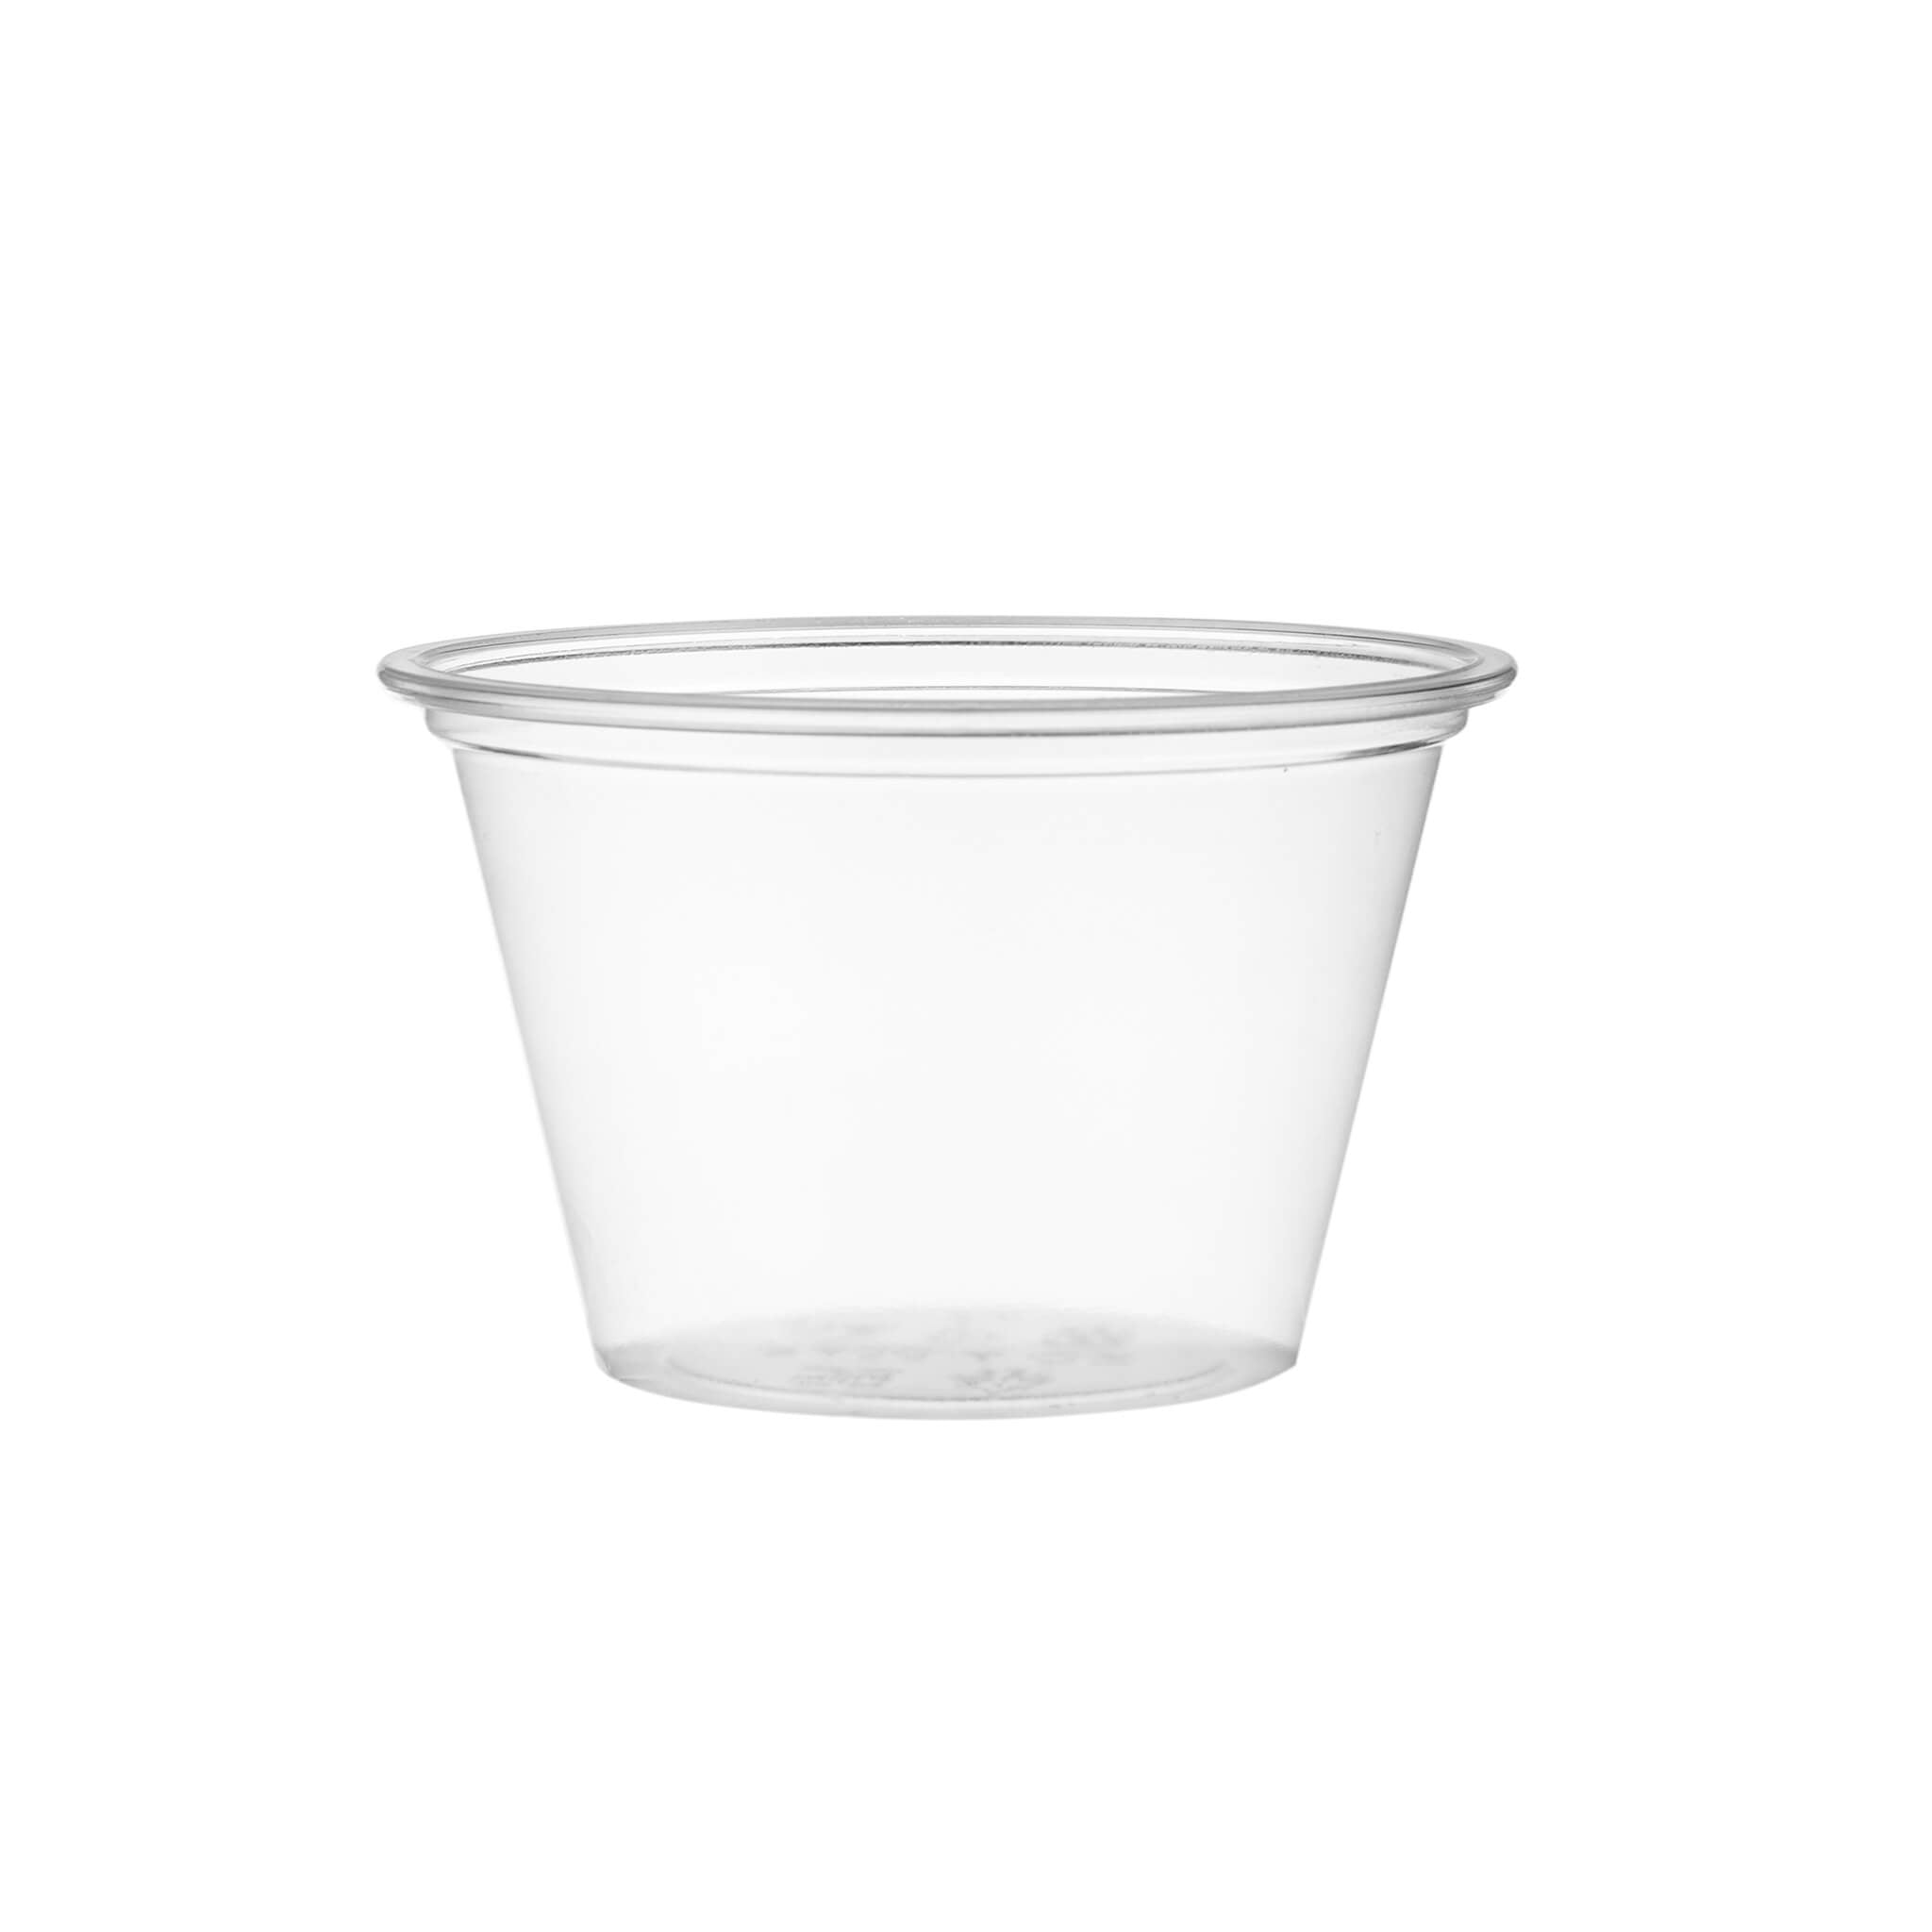 4 Oz clear portion cup for condiments and sauces - Hotpack Global